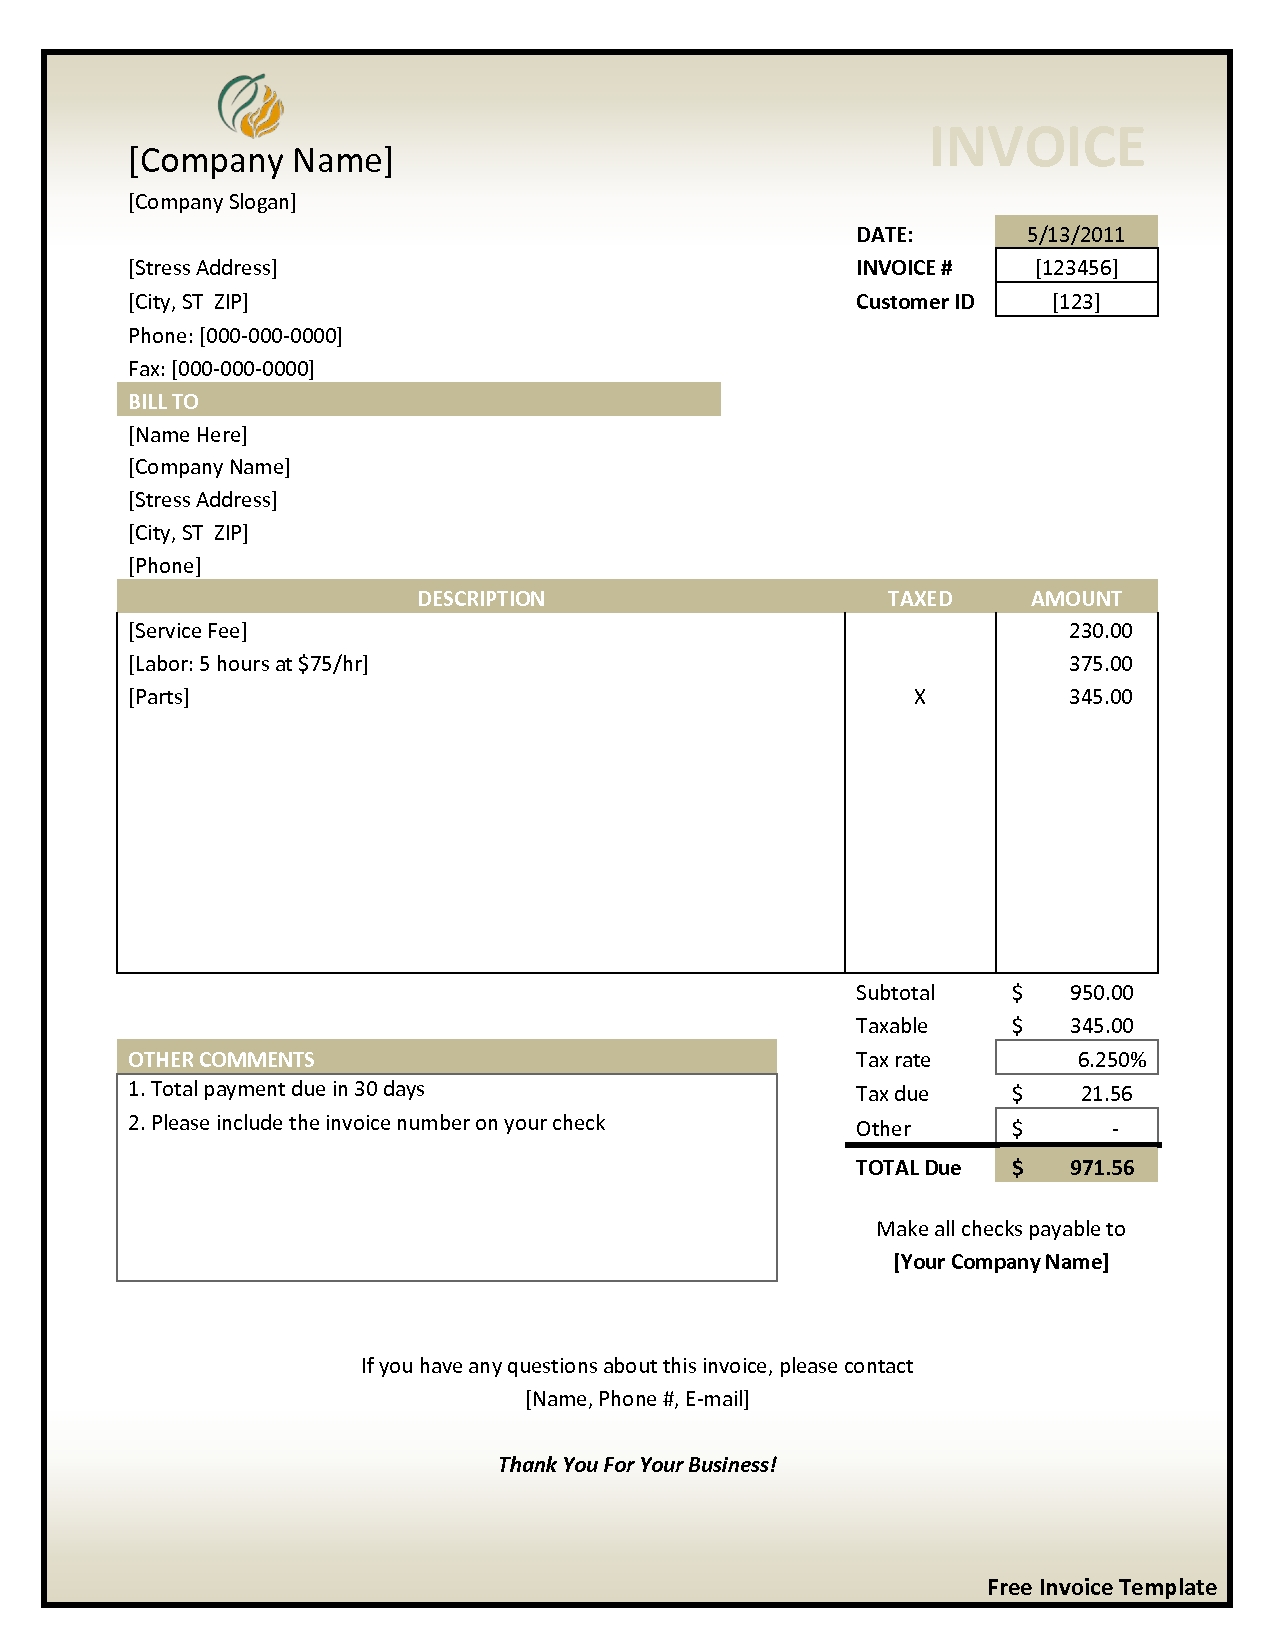 11 invoice template word download free top invoice templates download sample invoice